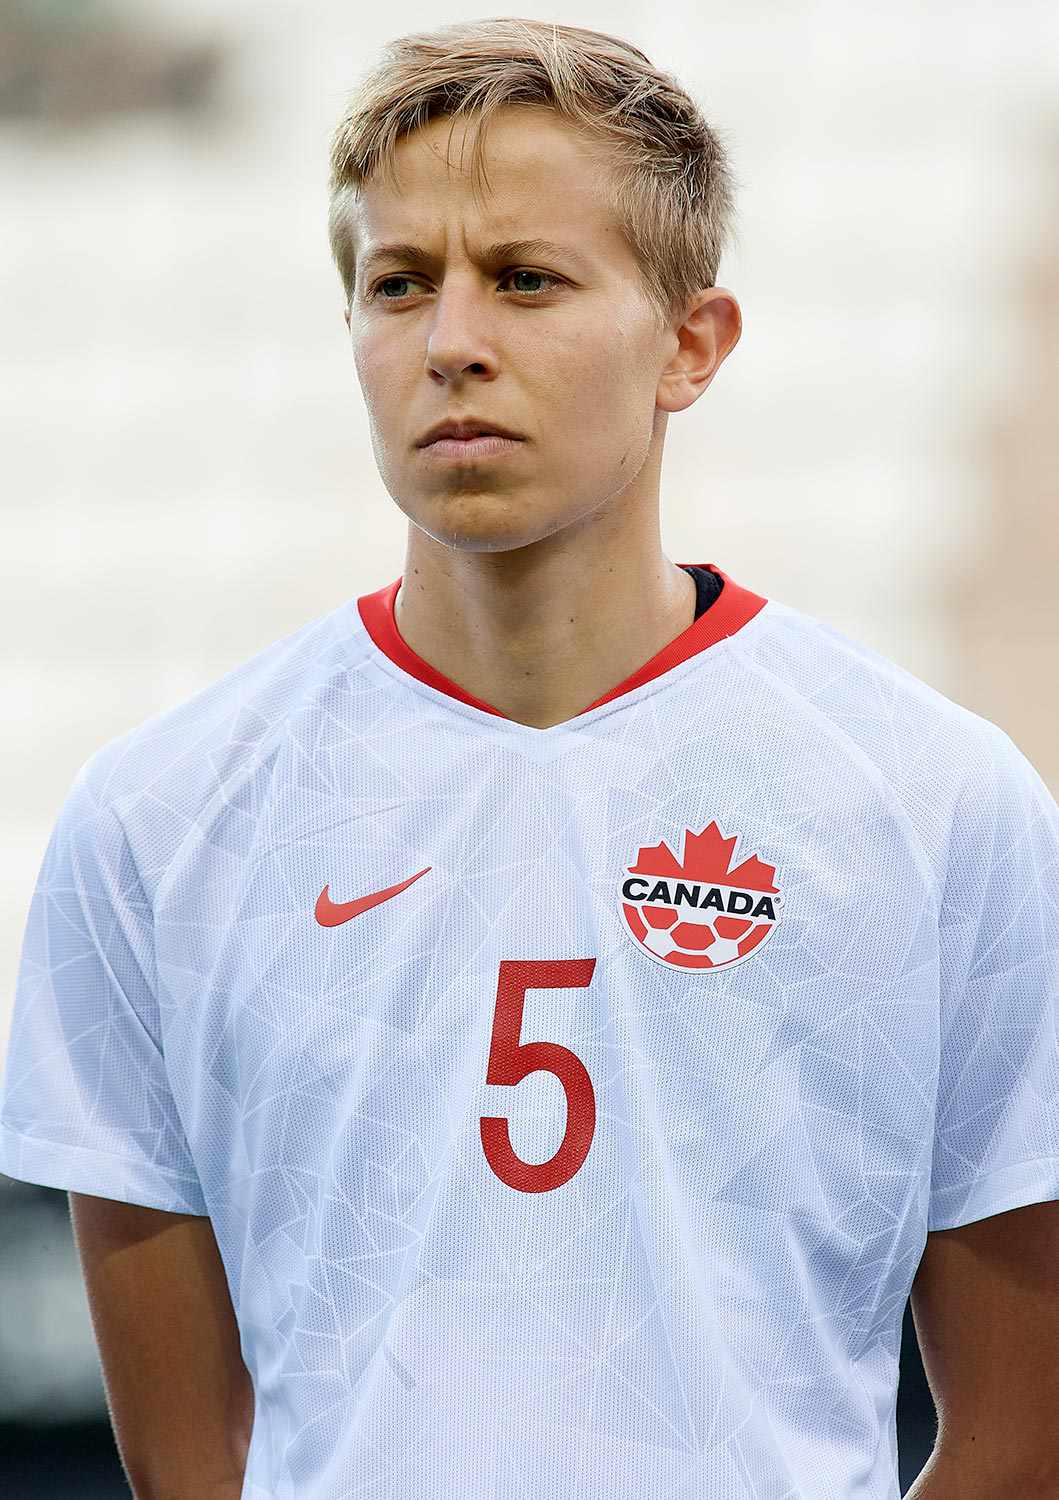 Canadian Soccer Player Quinn Becomes The First Out Trans And Nonbinary